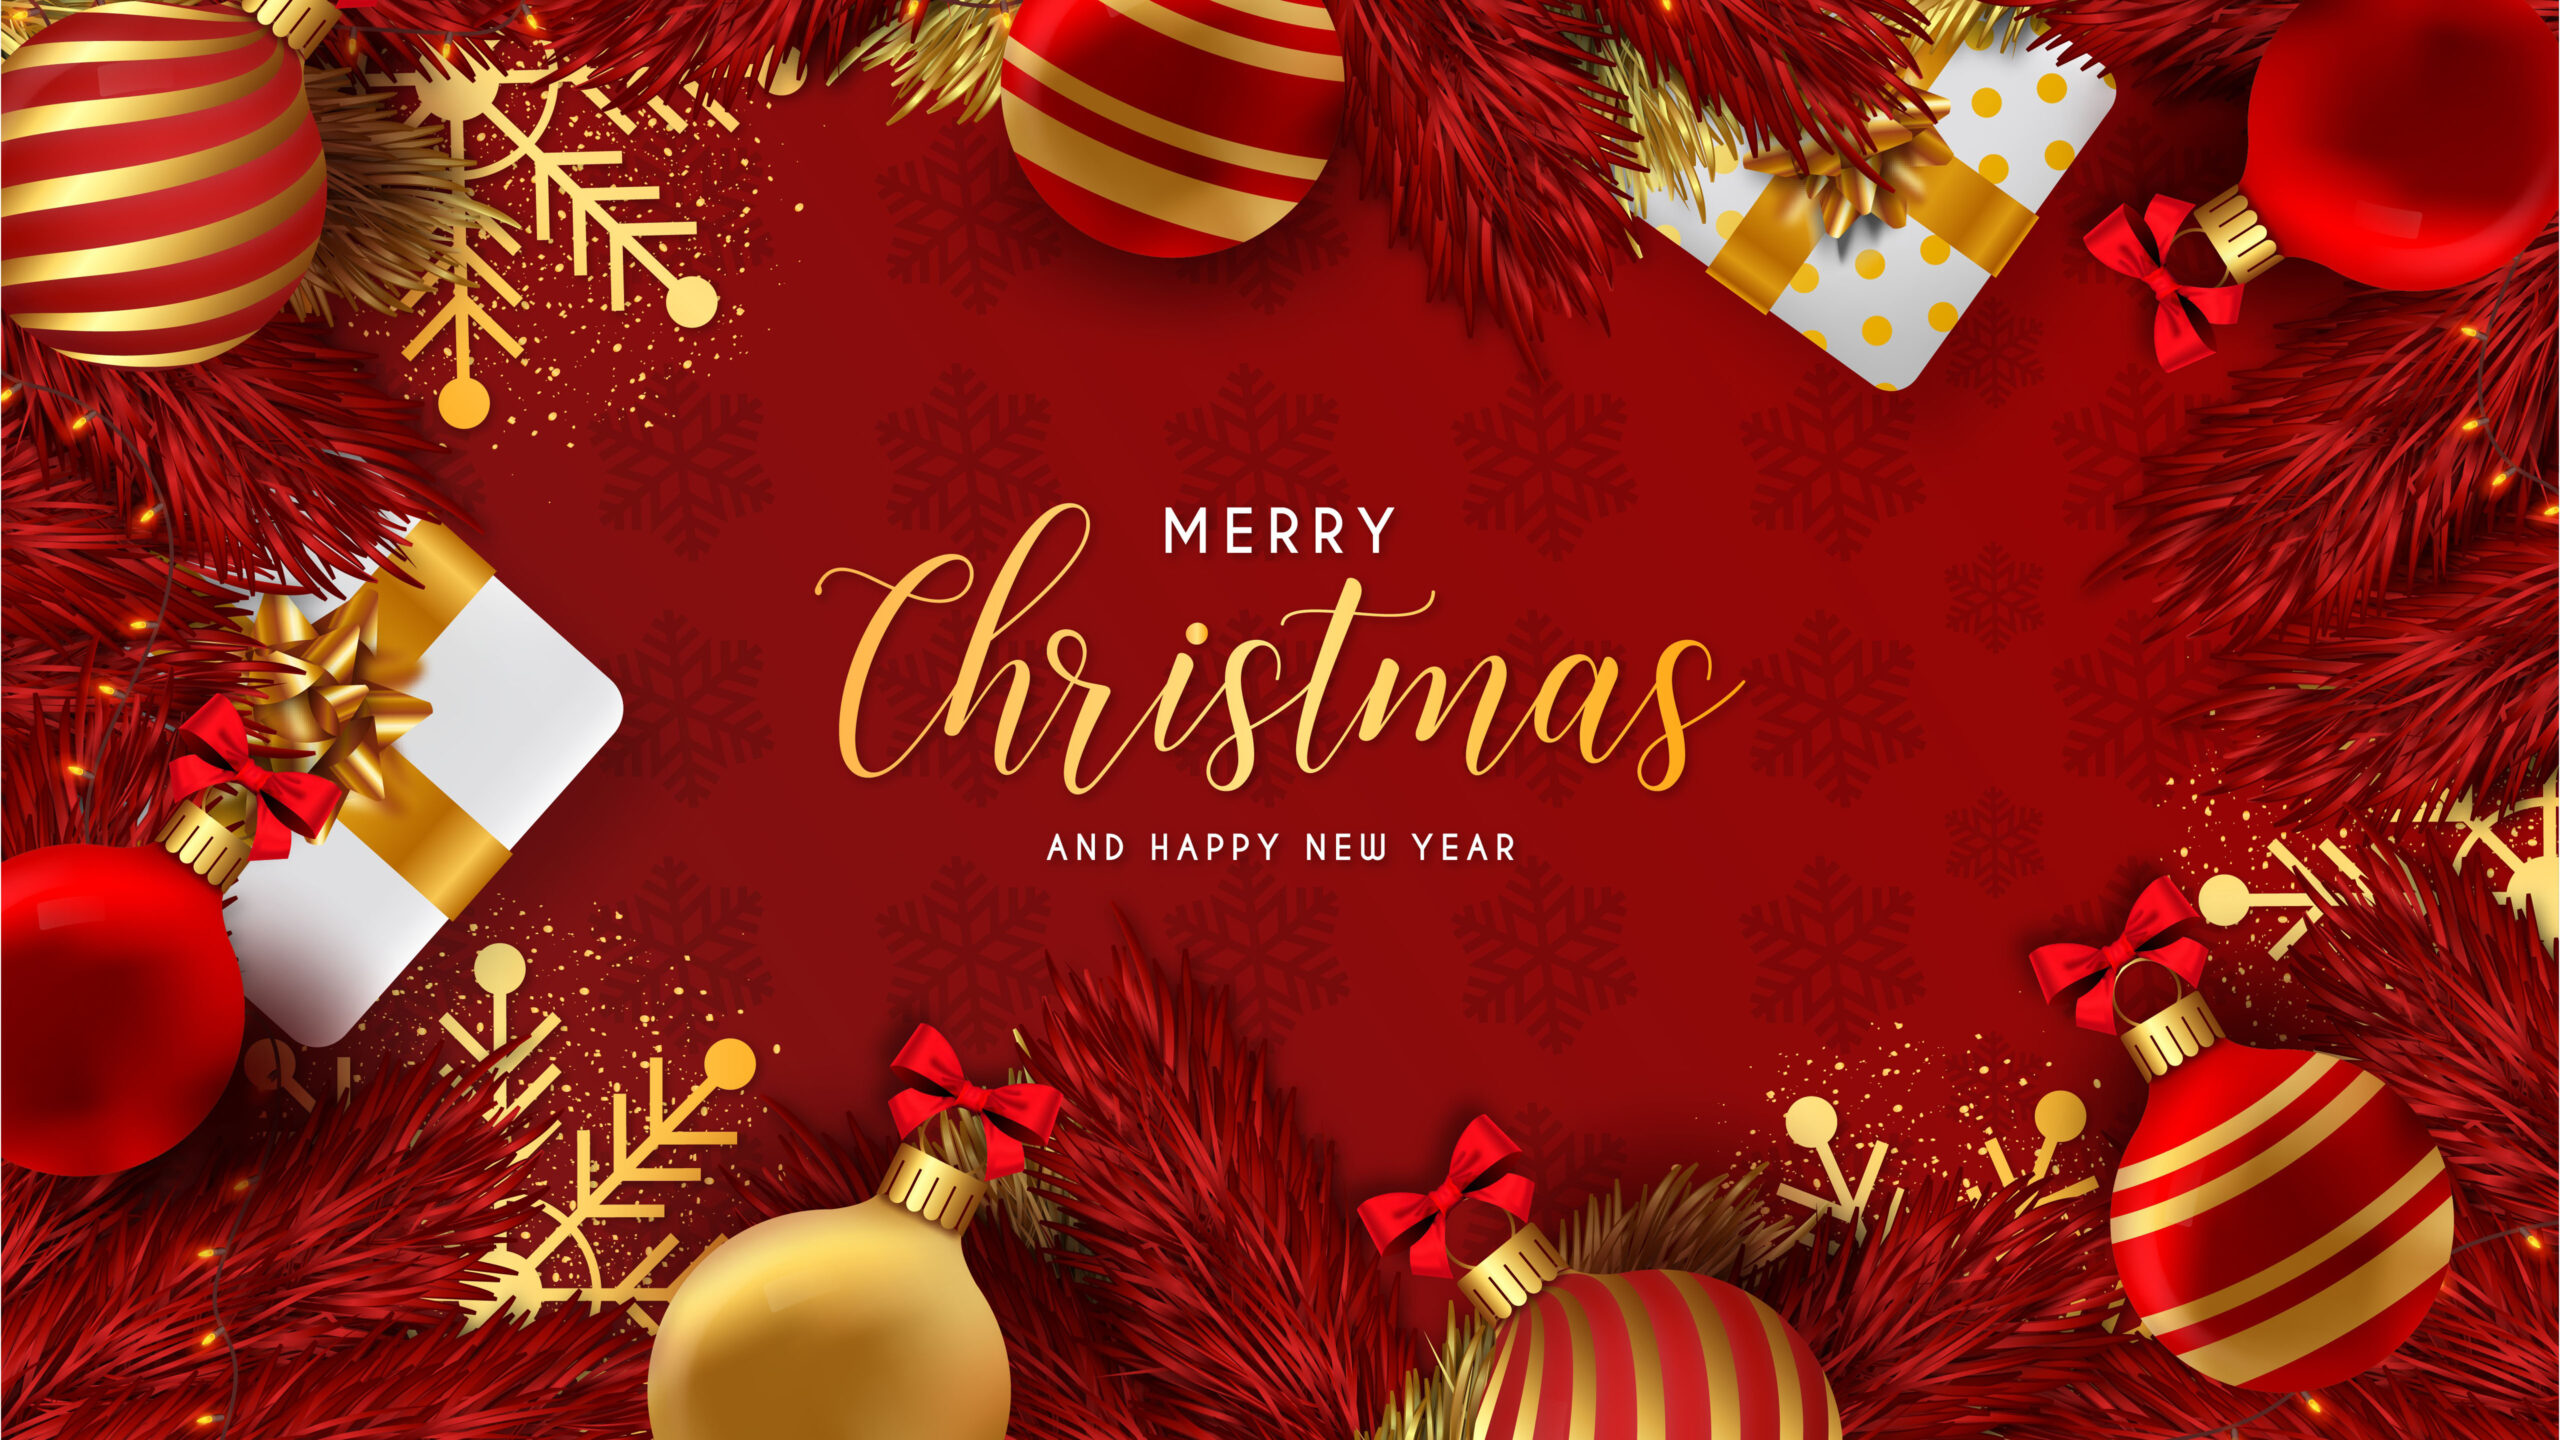 Merry Christmas And Happy New Year Red Golden Christmas Decoration Balls Ornaments K K 2K Christmas